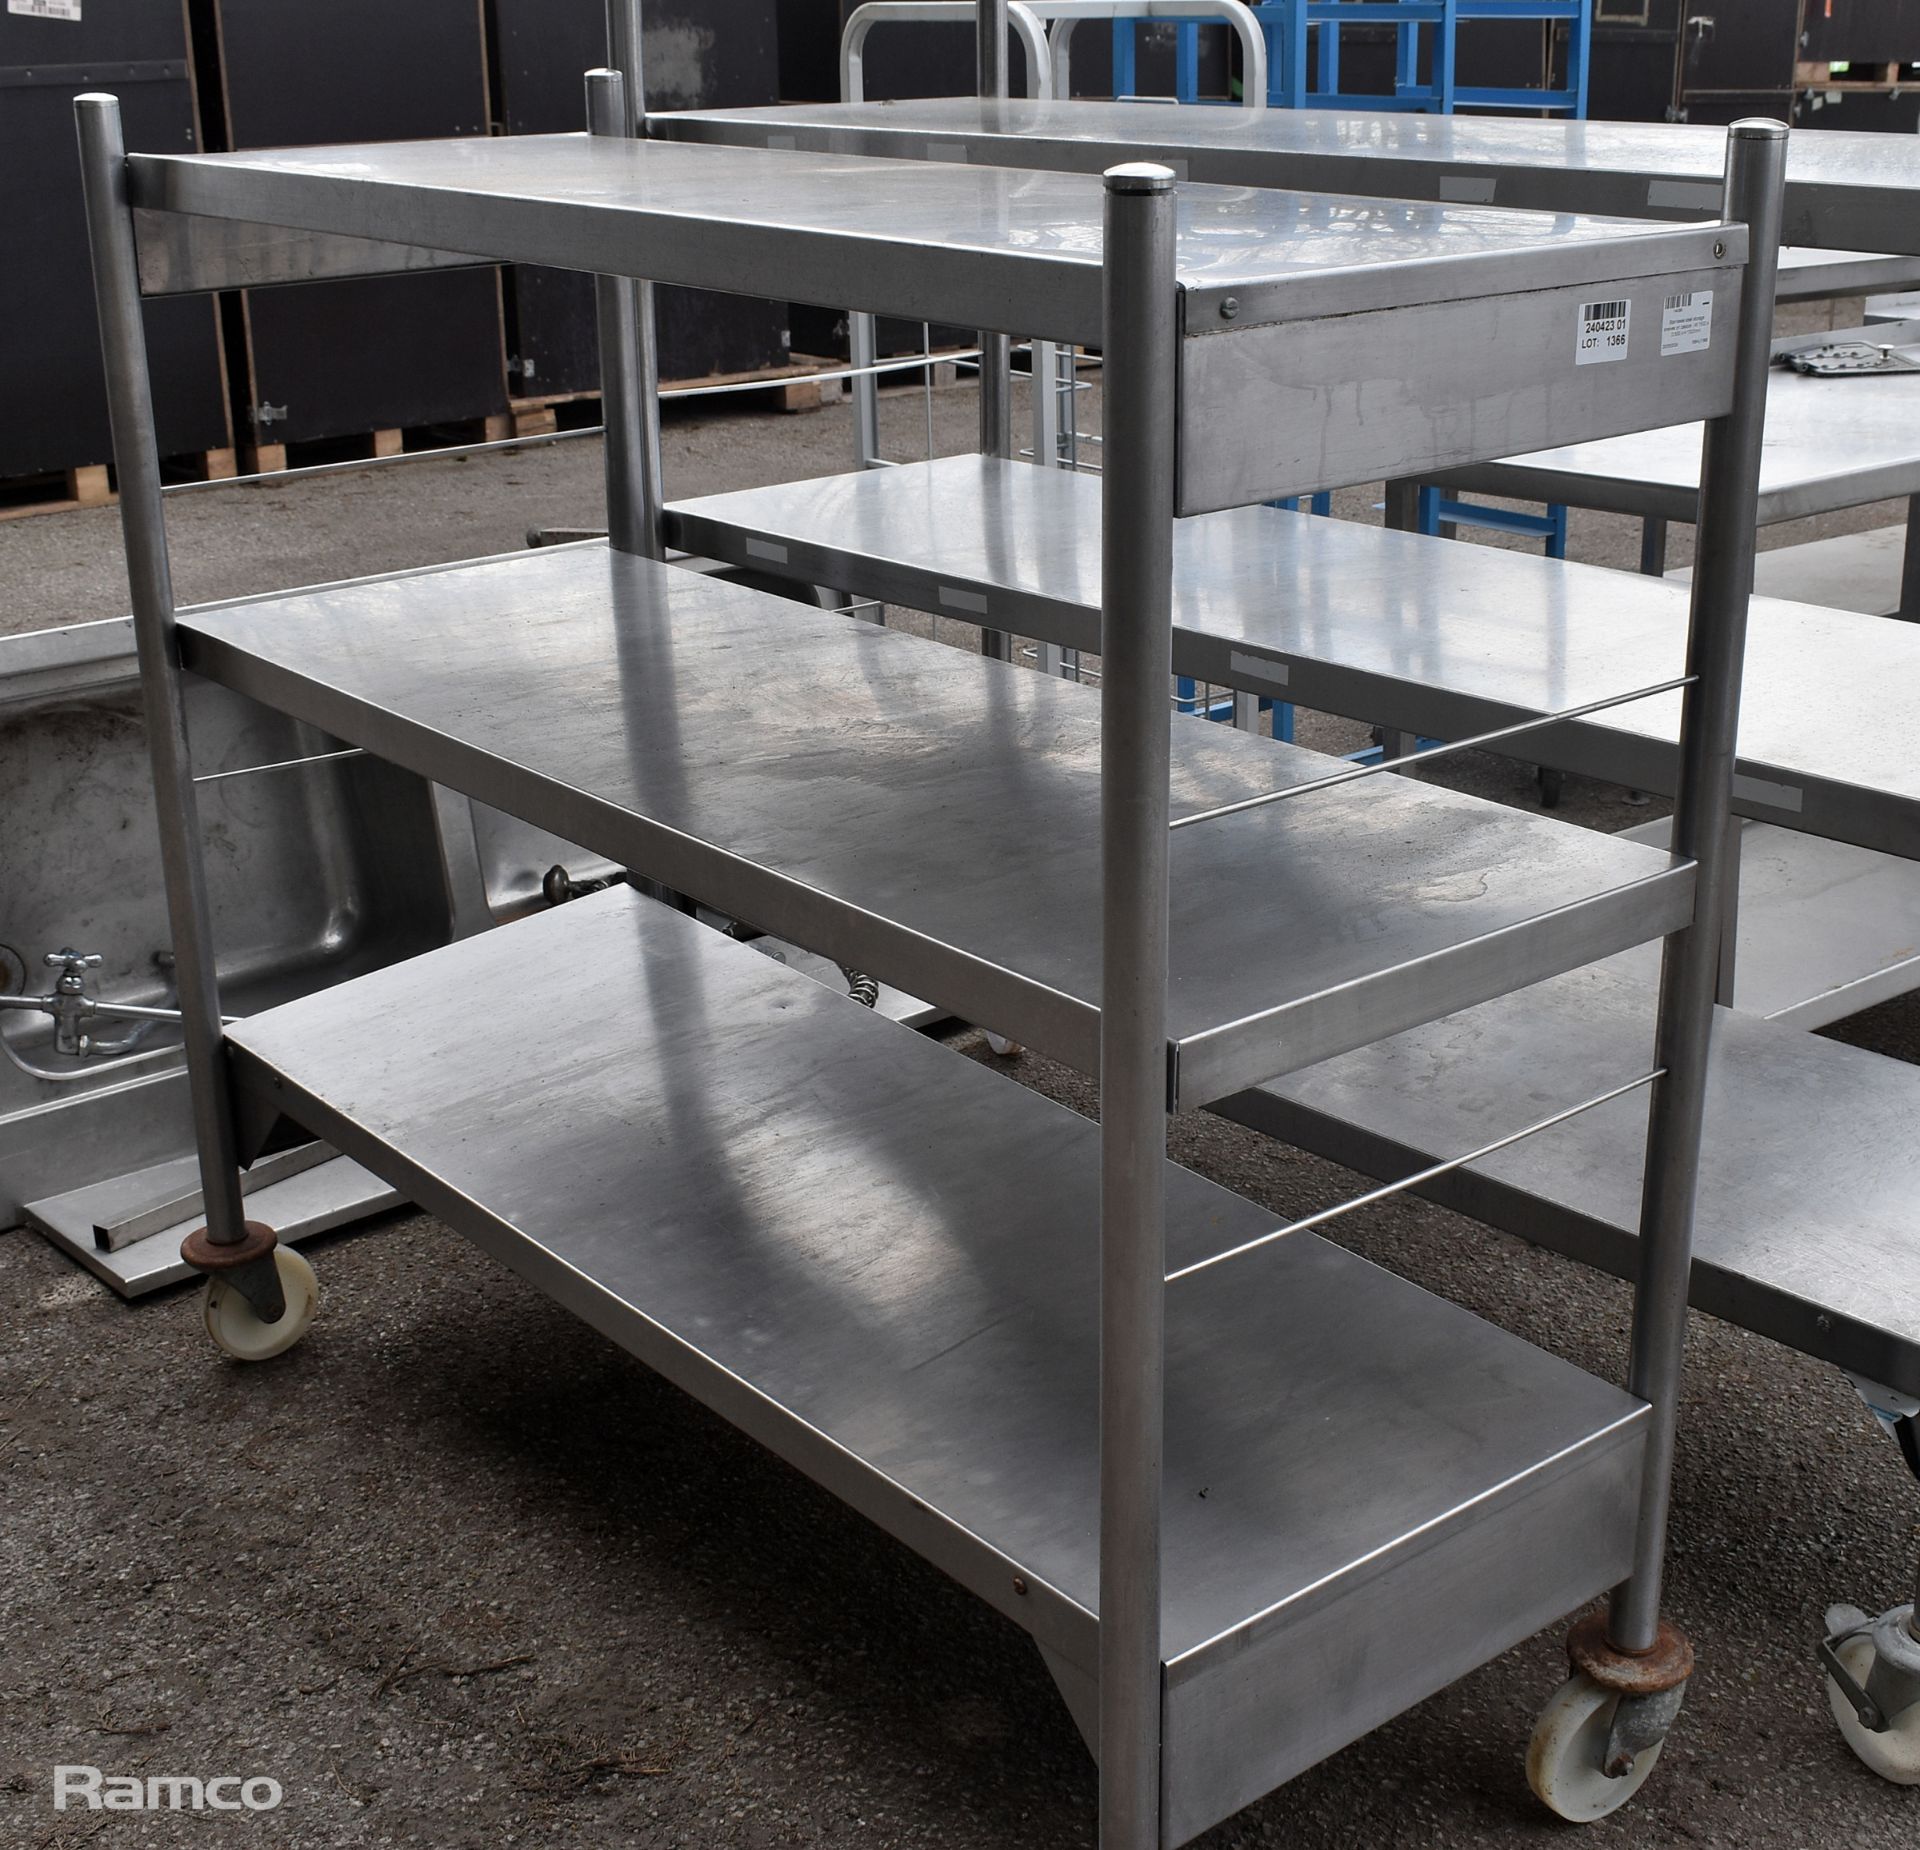 Stainless steel storage shelves on castors - W 1500 x D 500 x H 1300mm - Image 2 of 3